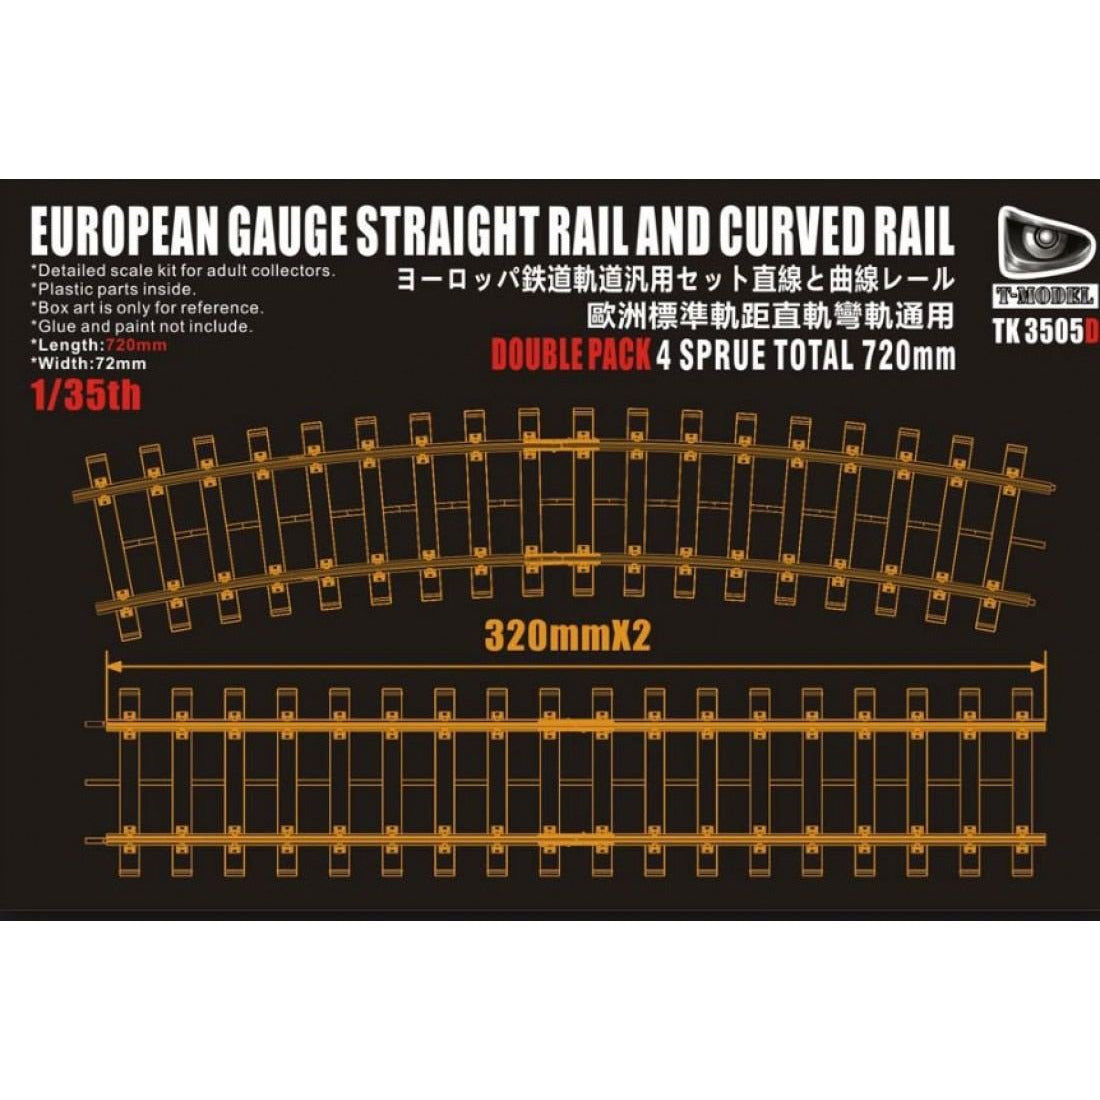 European Gauge Straight and Curved Rail 1/35 by T Model